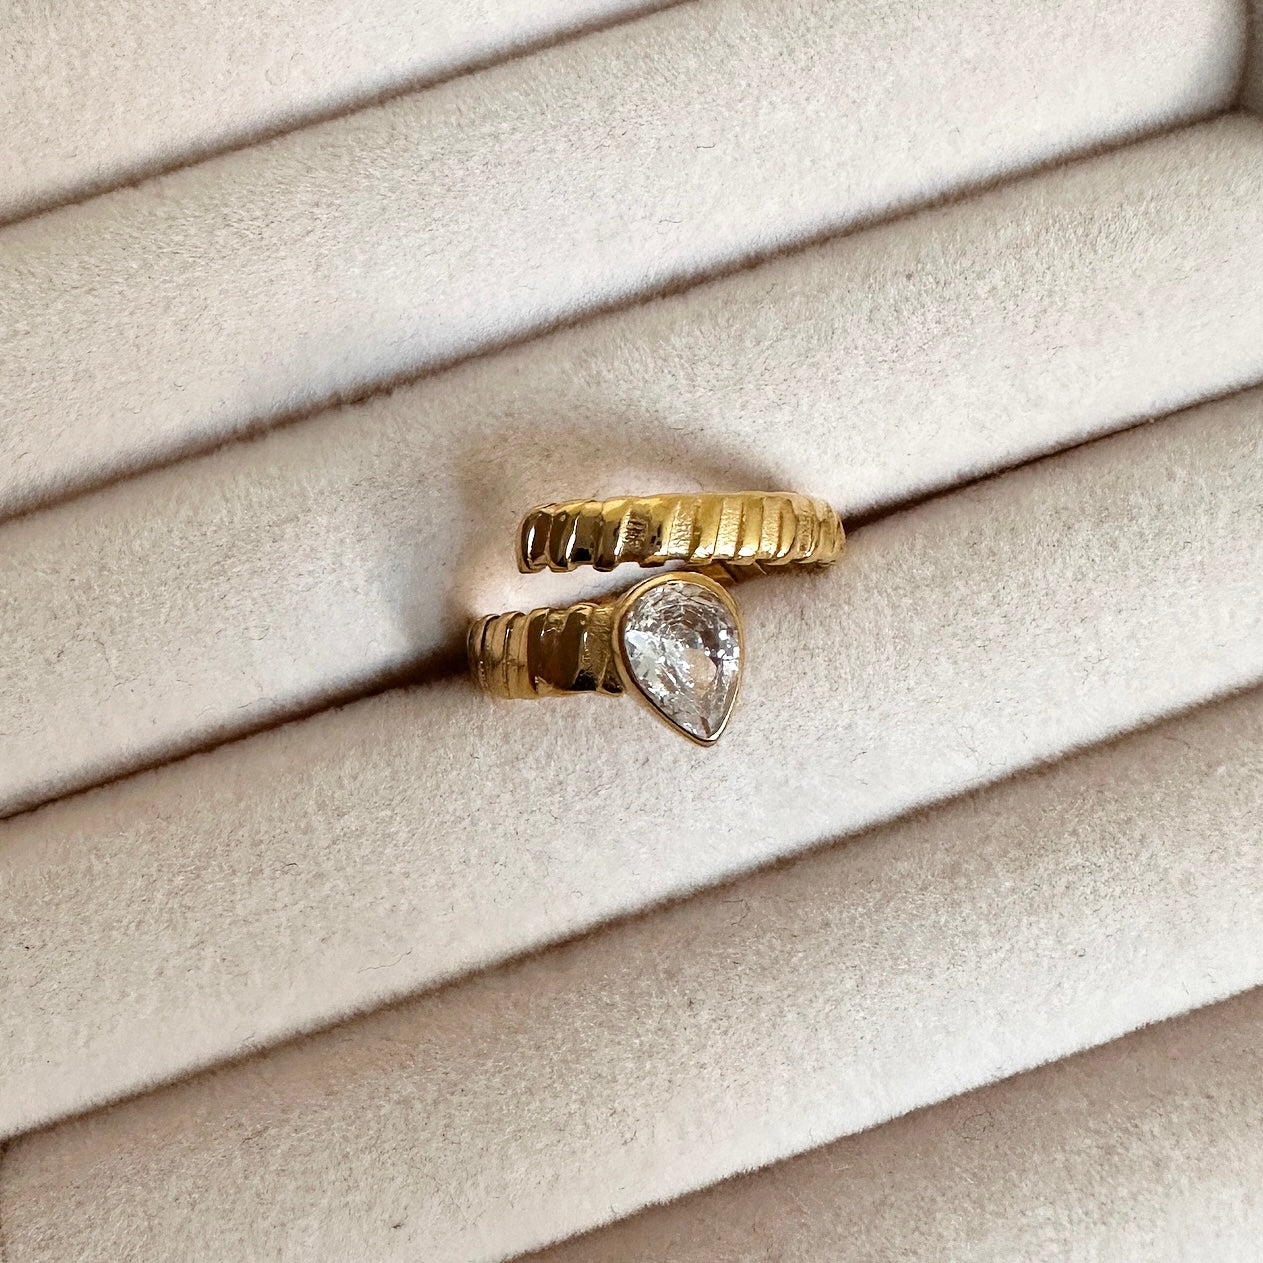 The Hold Me Tight Ring features an emerald / clear stone elegantly wrapped up in a simple and sophisticated design. Crafted with modern sophistication, this ring is sure to stand out.  18k gold plated ring. Details: Adjustable one size.